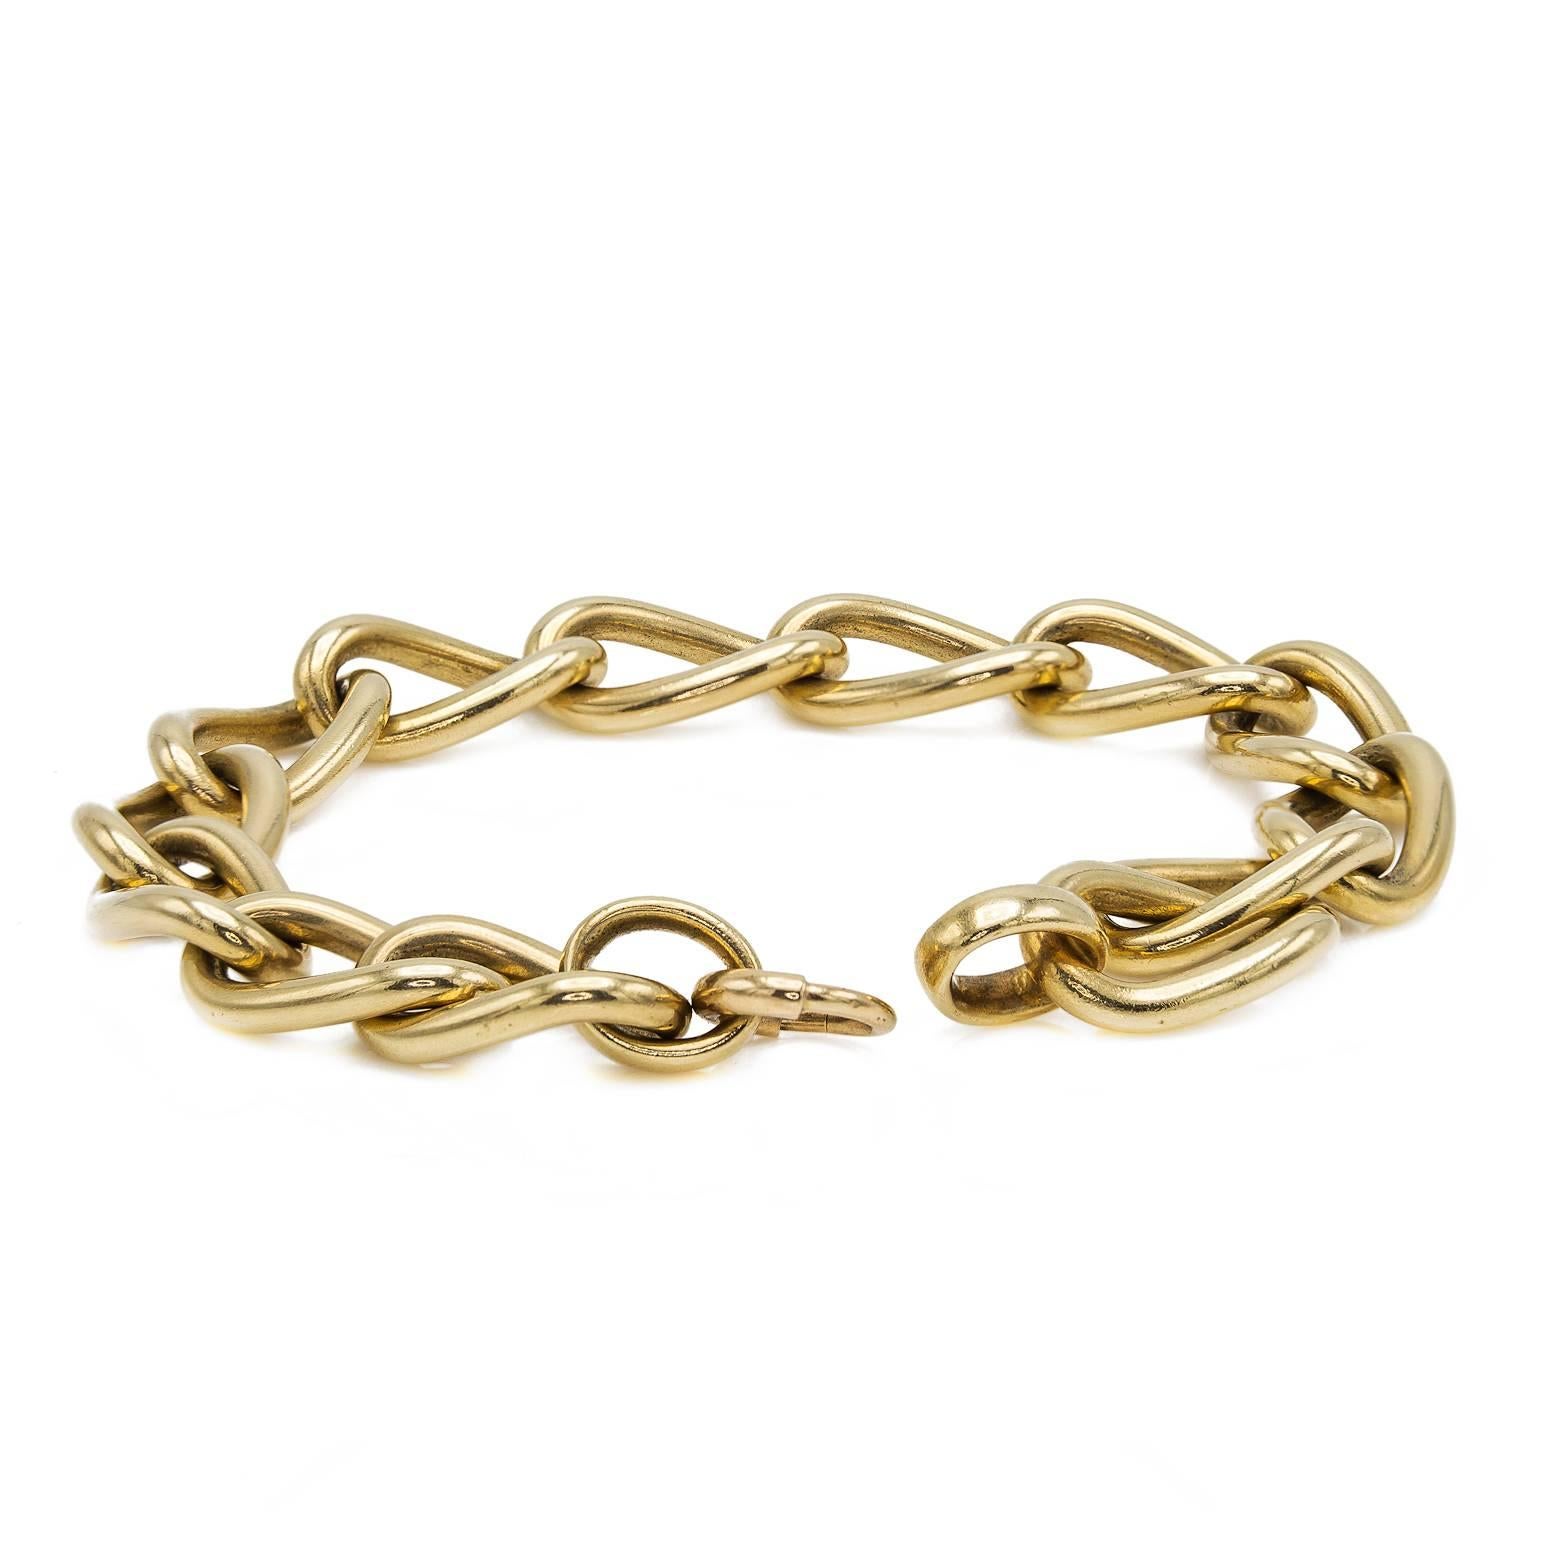 This is a wonderfully designed solid gold twisted link bracelet. It is comfortable and feels amazing on. You can wear it next to your favorite watch, ad a coin or sentimental charm or coin from your travels.